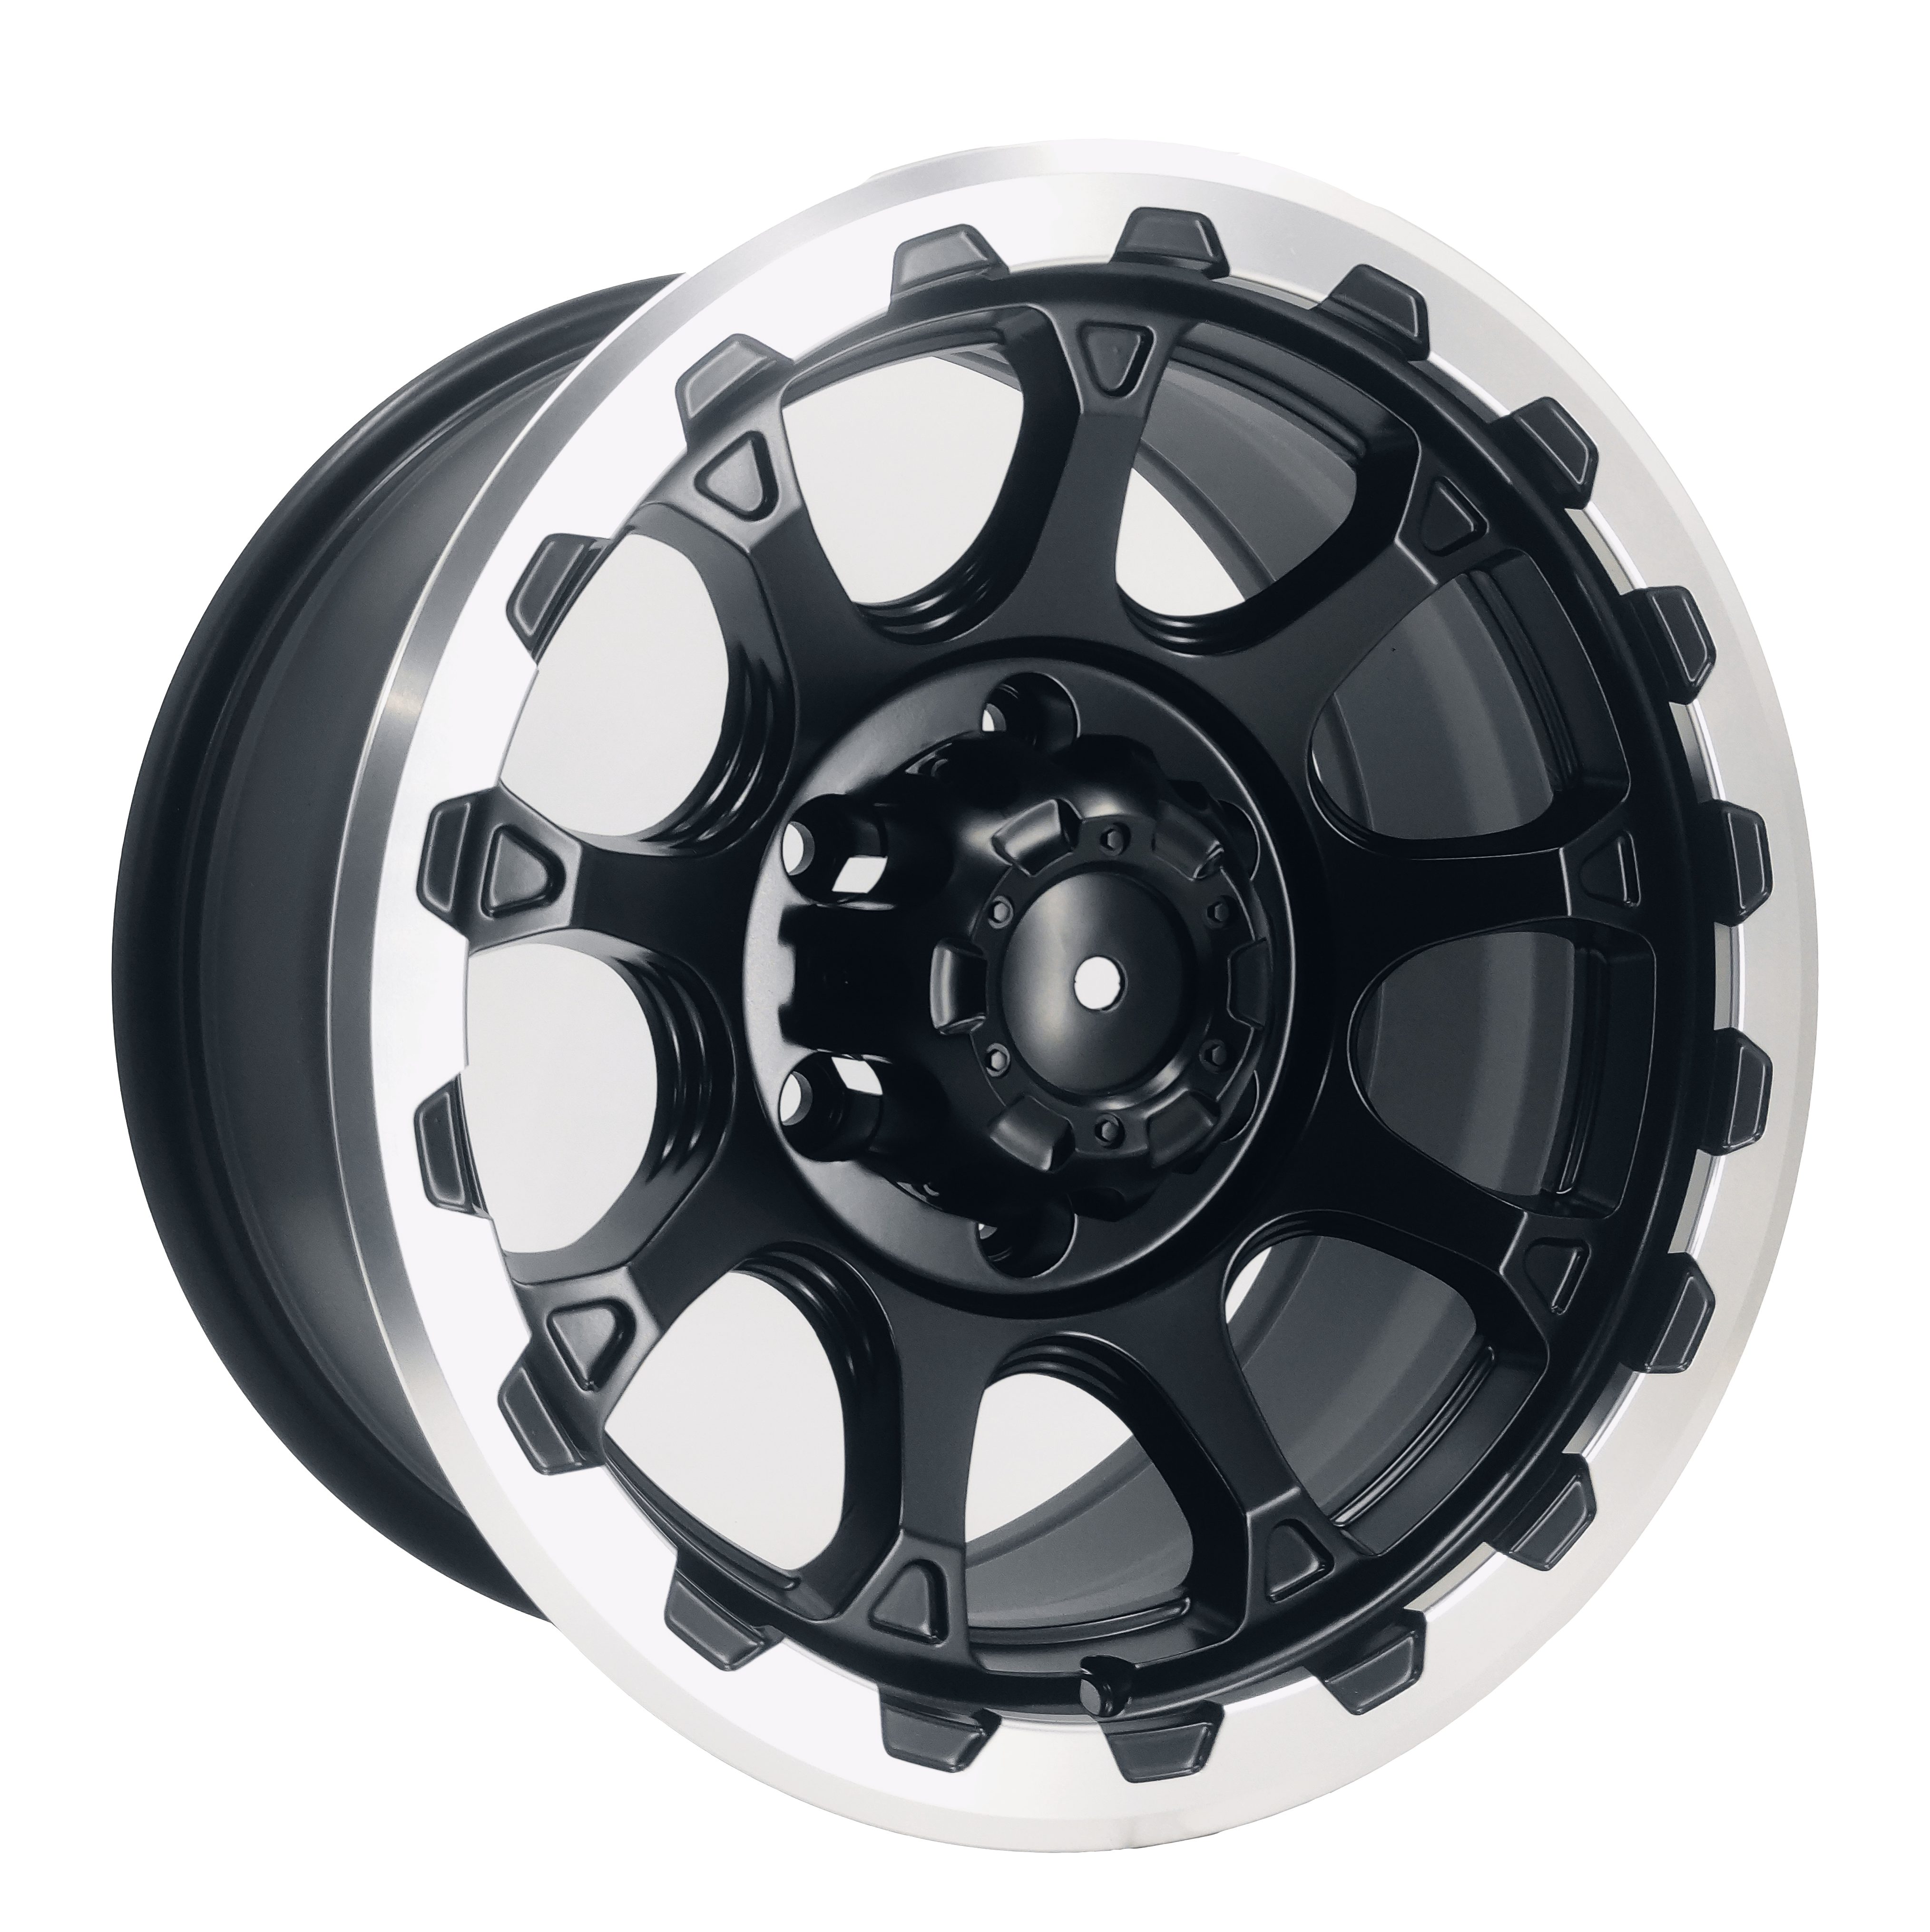 Rayone Wheels 4×4 Off-Road 16×8.0 17×9.0 Car Alloy Wheels For Jeep And SUV